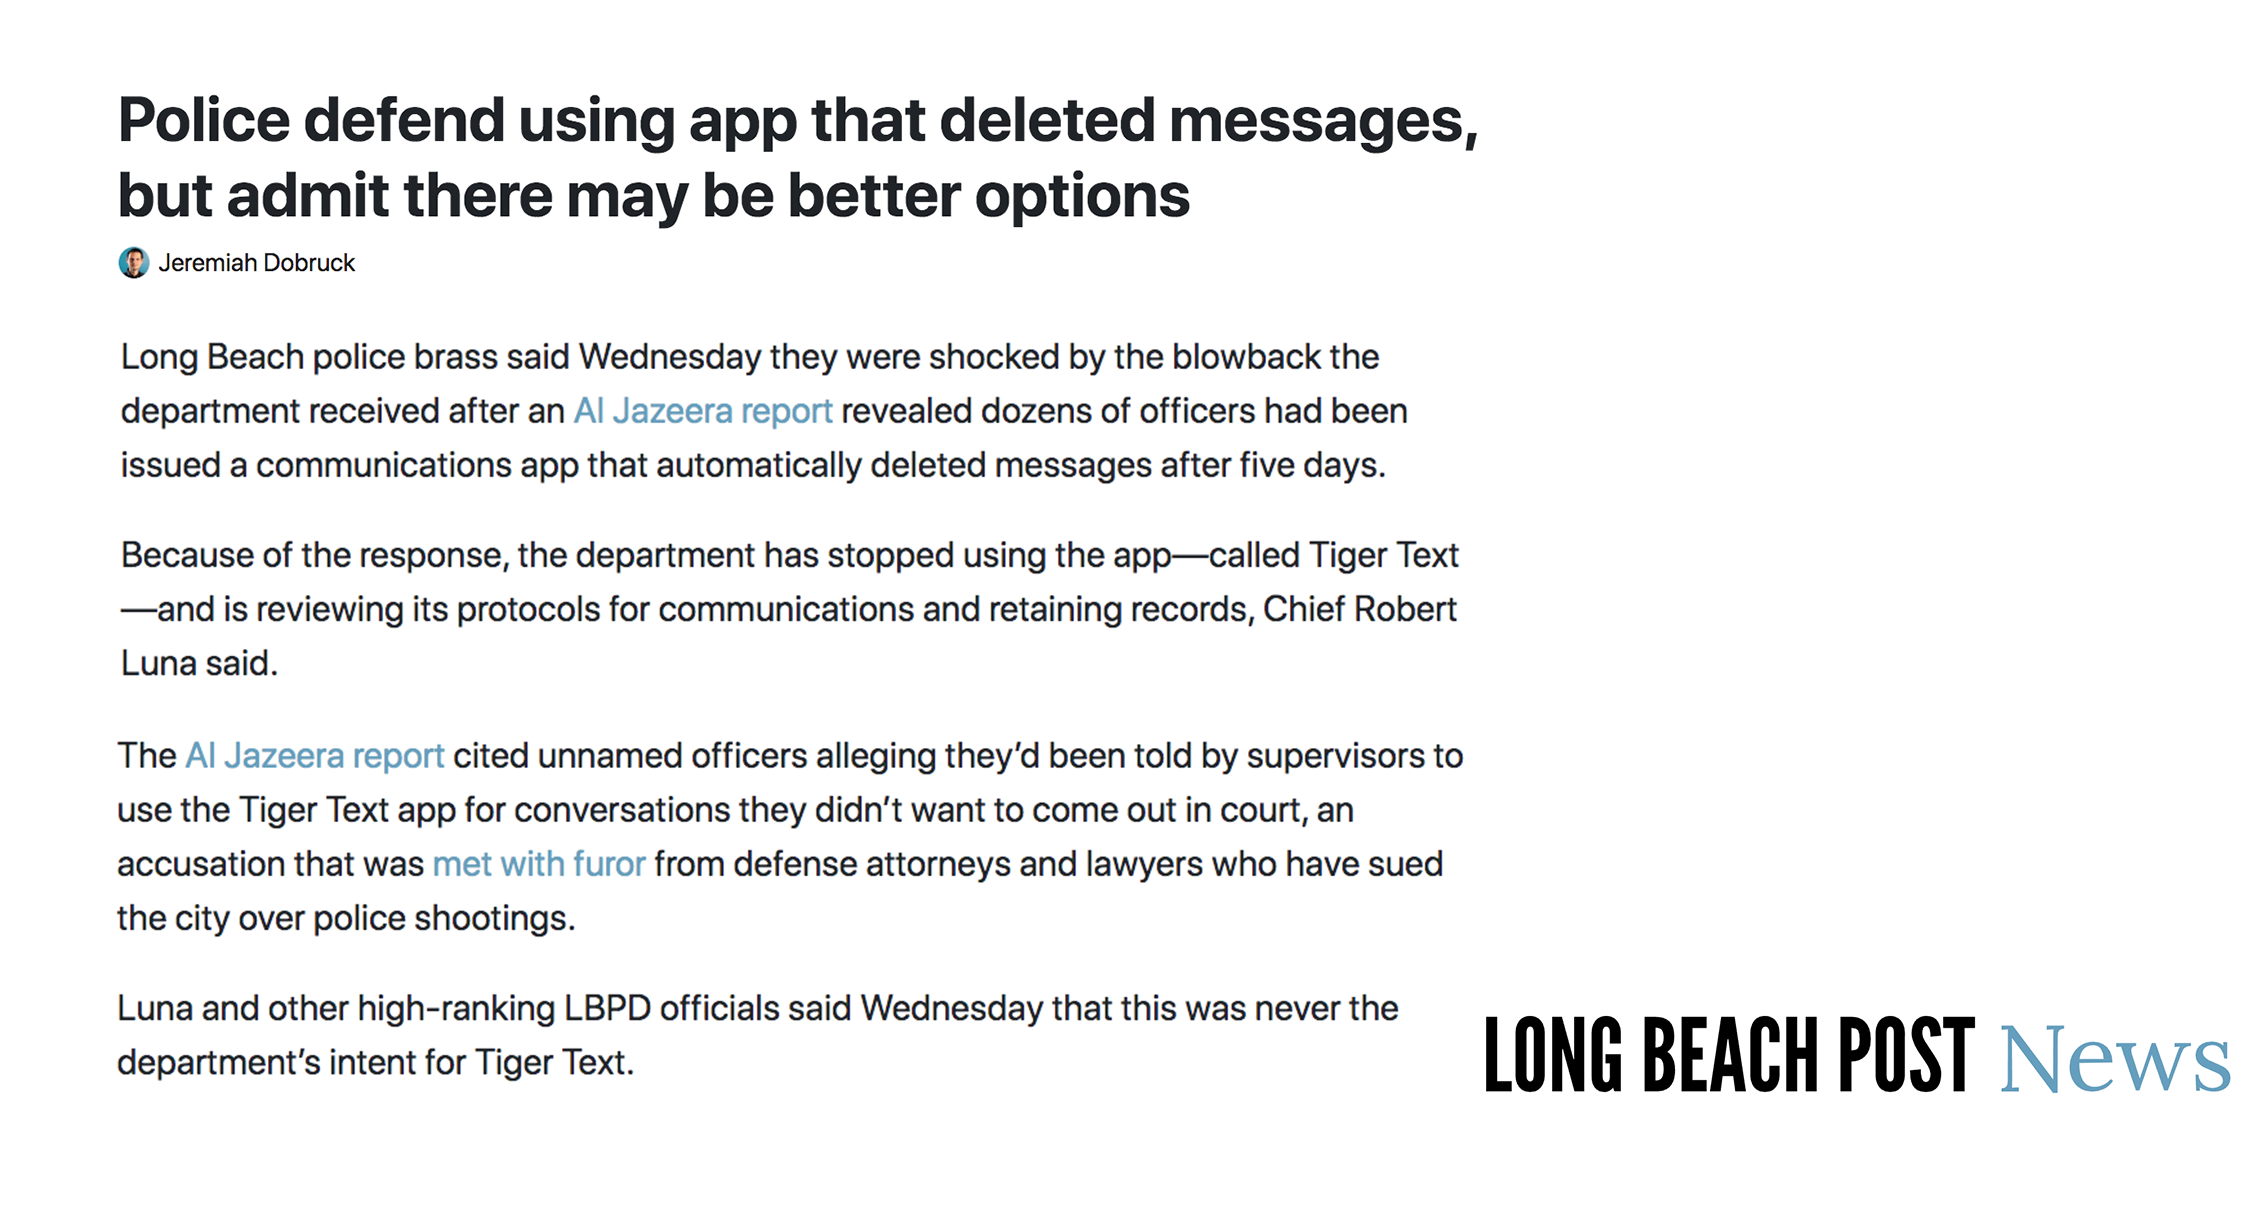 Police defend using app that deleted messages, but admit there may be better options